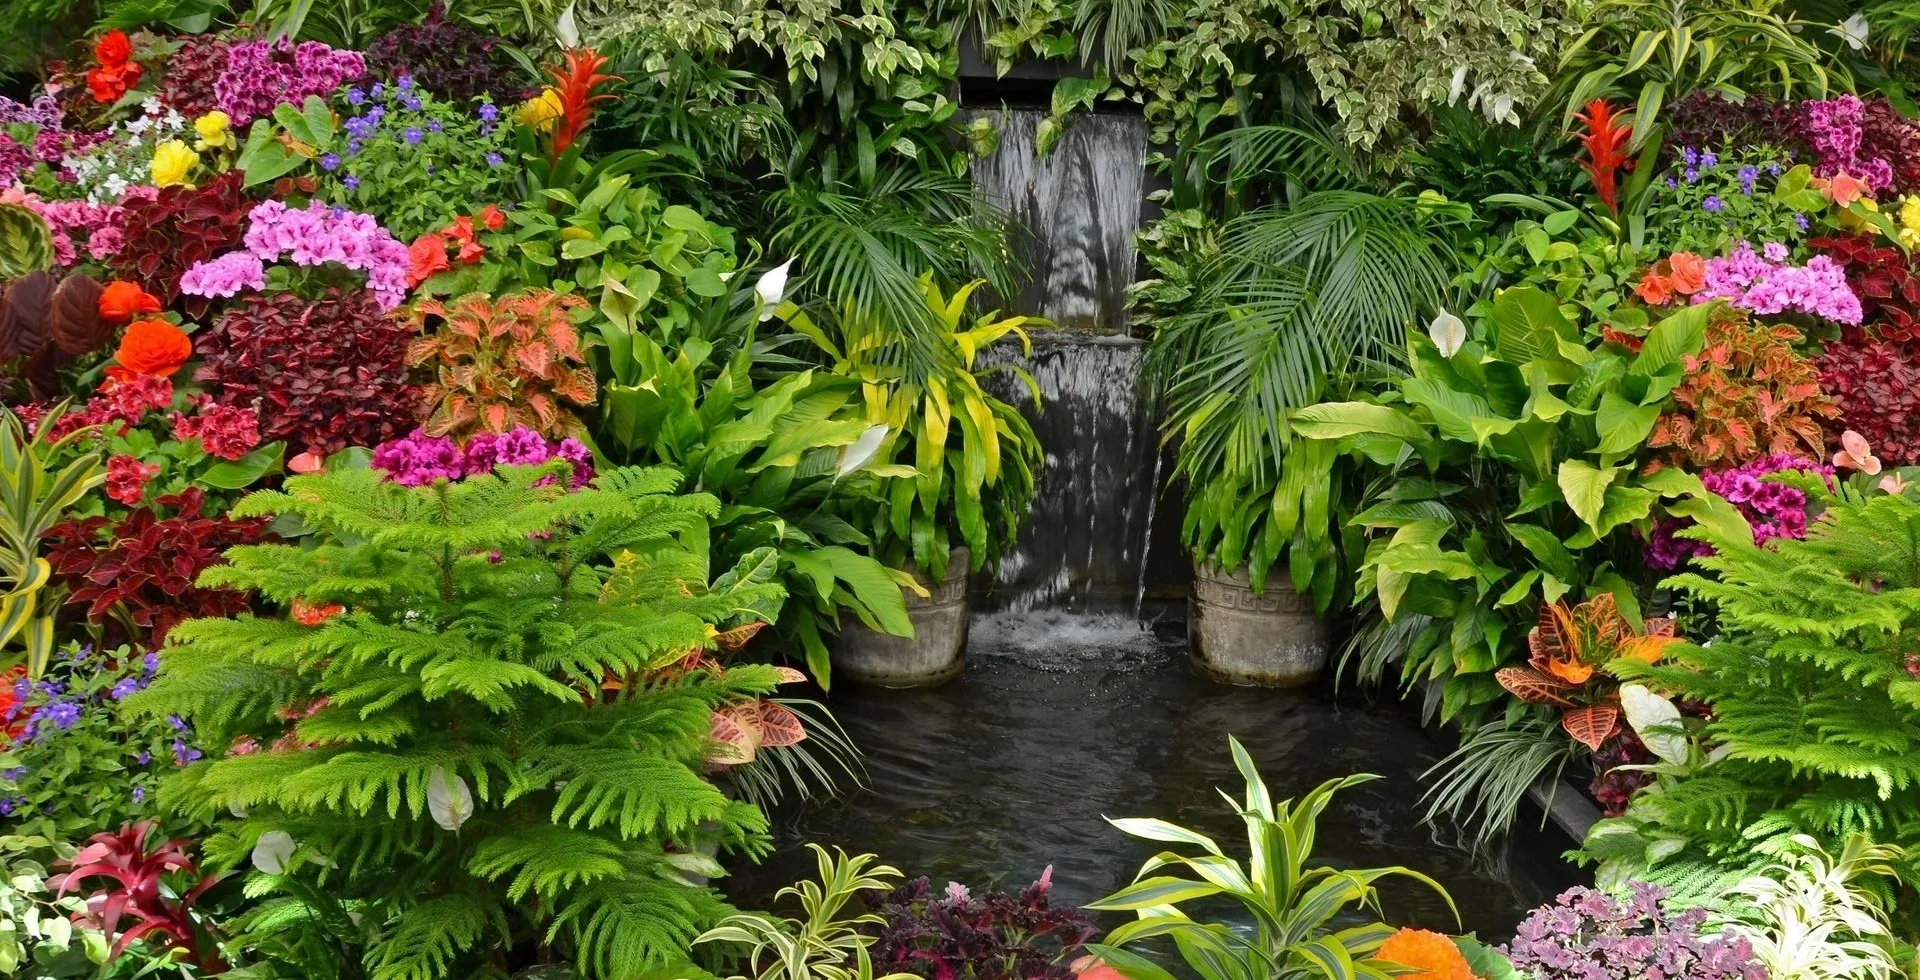 A waterfall surrounded by plants and flowers.